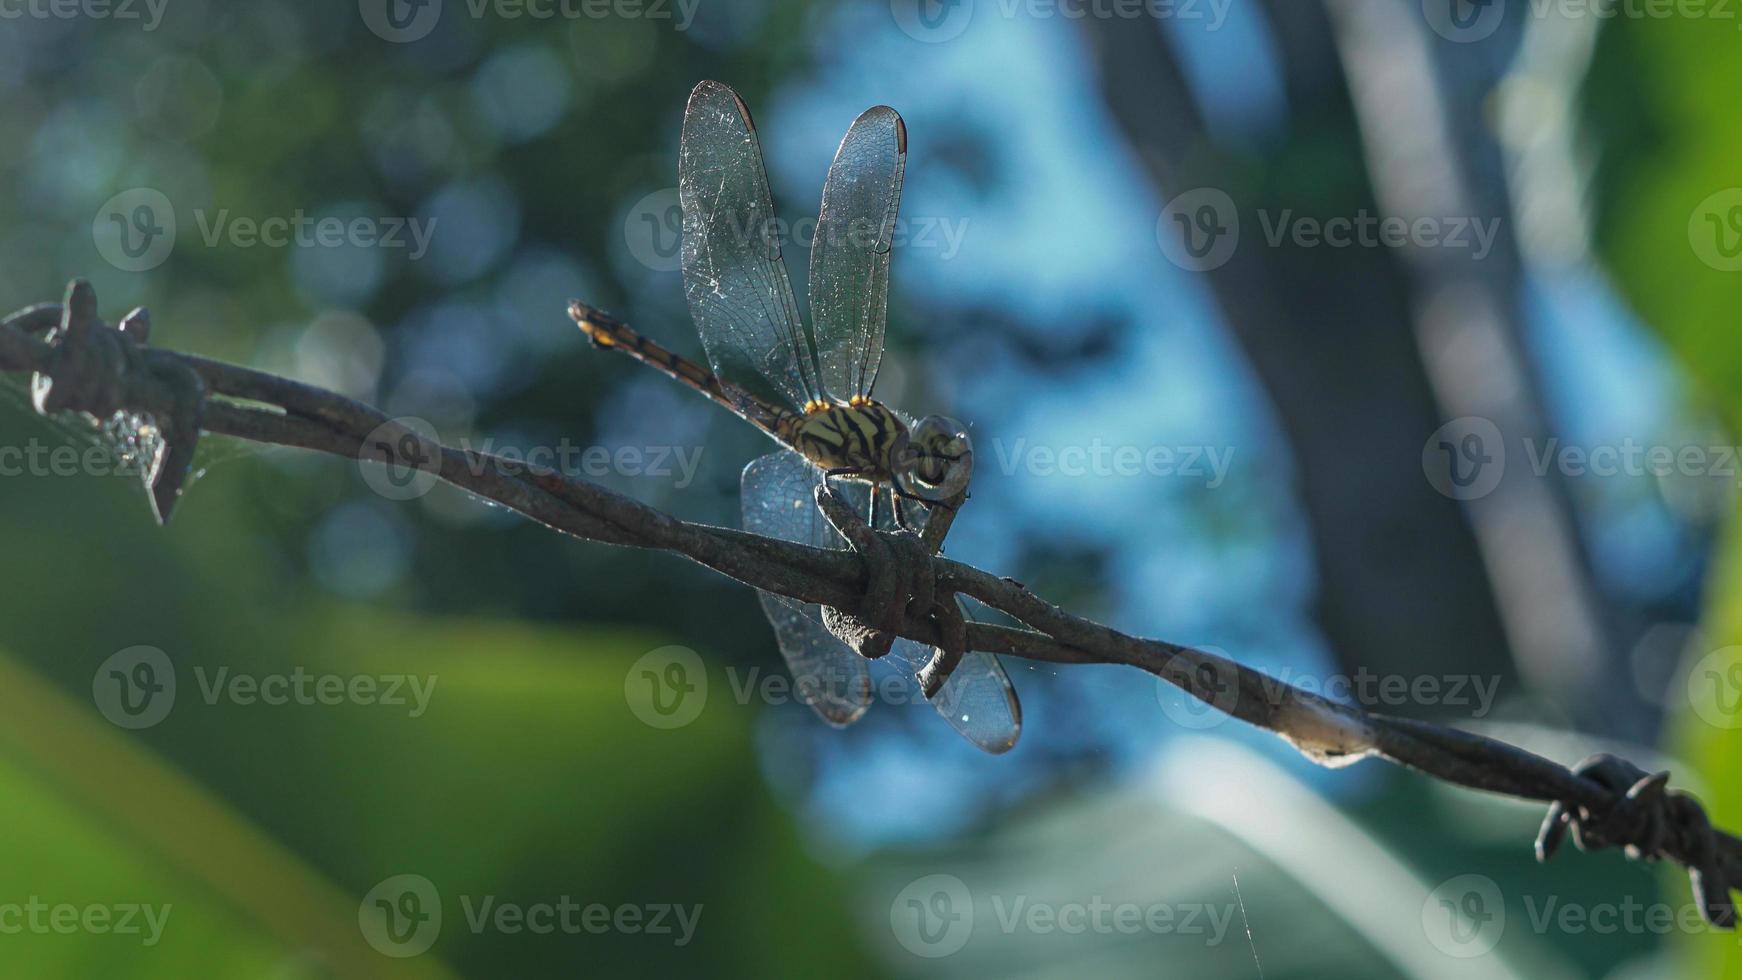 Dragonfly perched, close up. stock photo